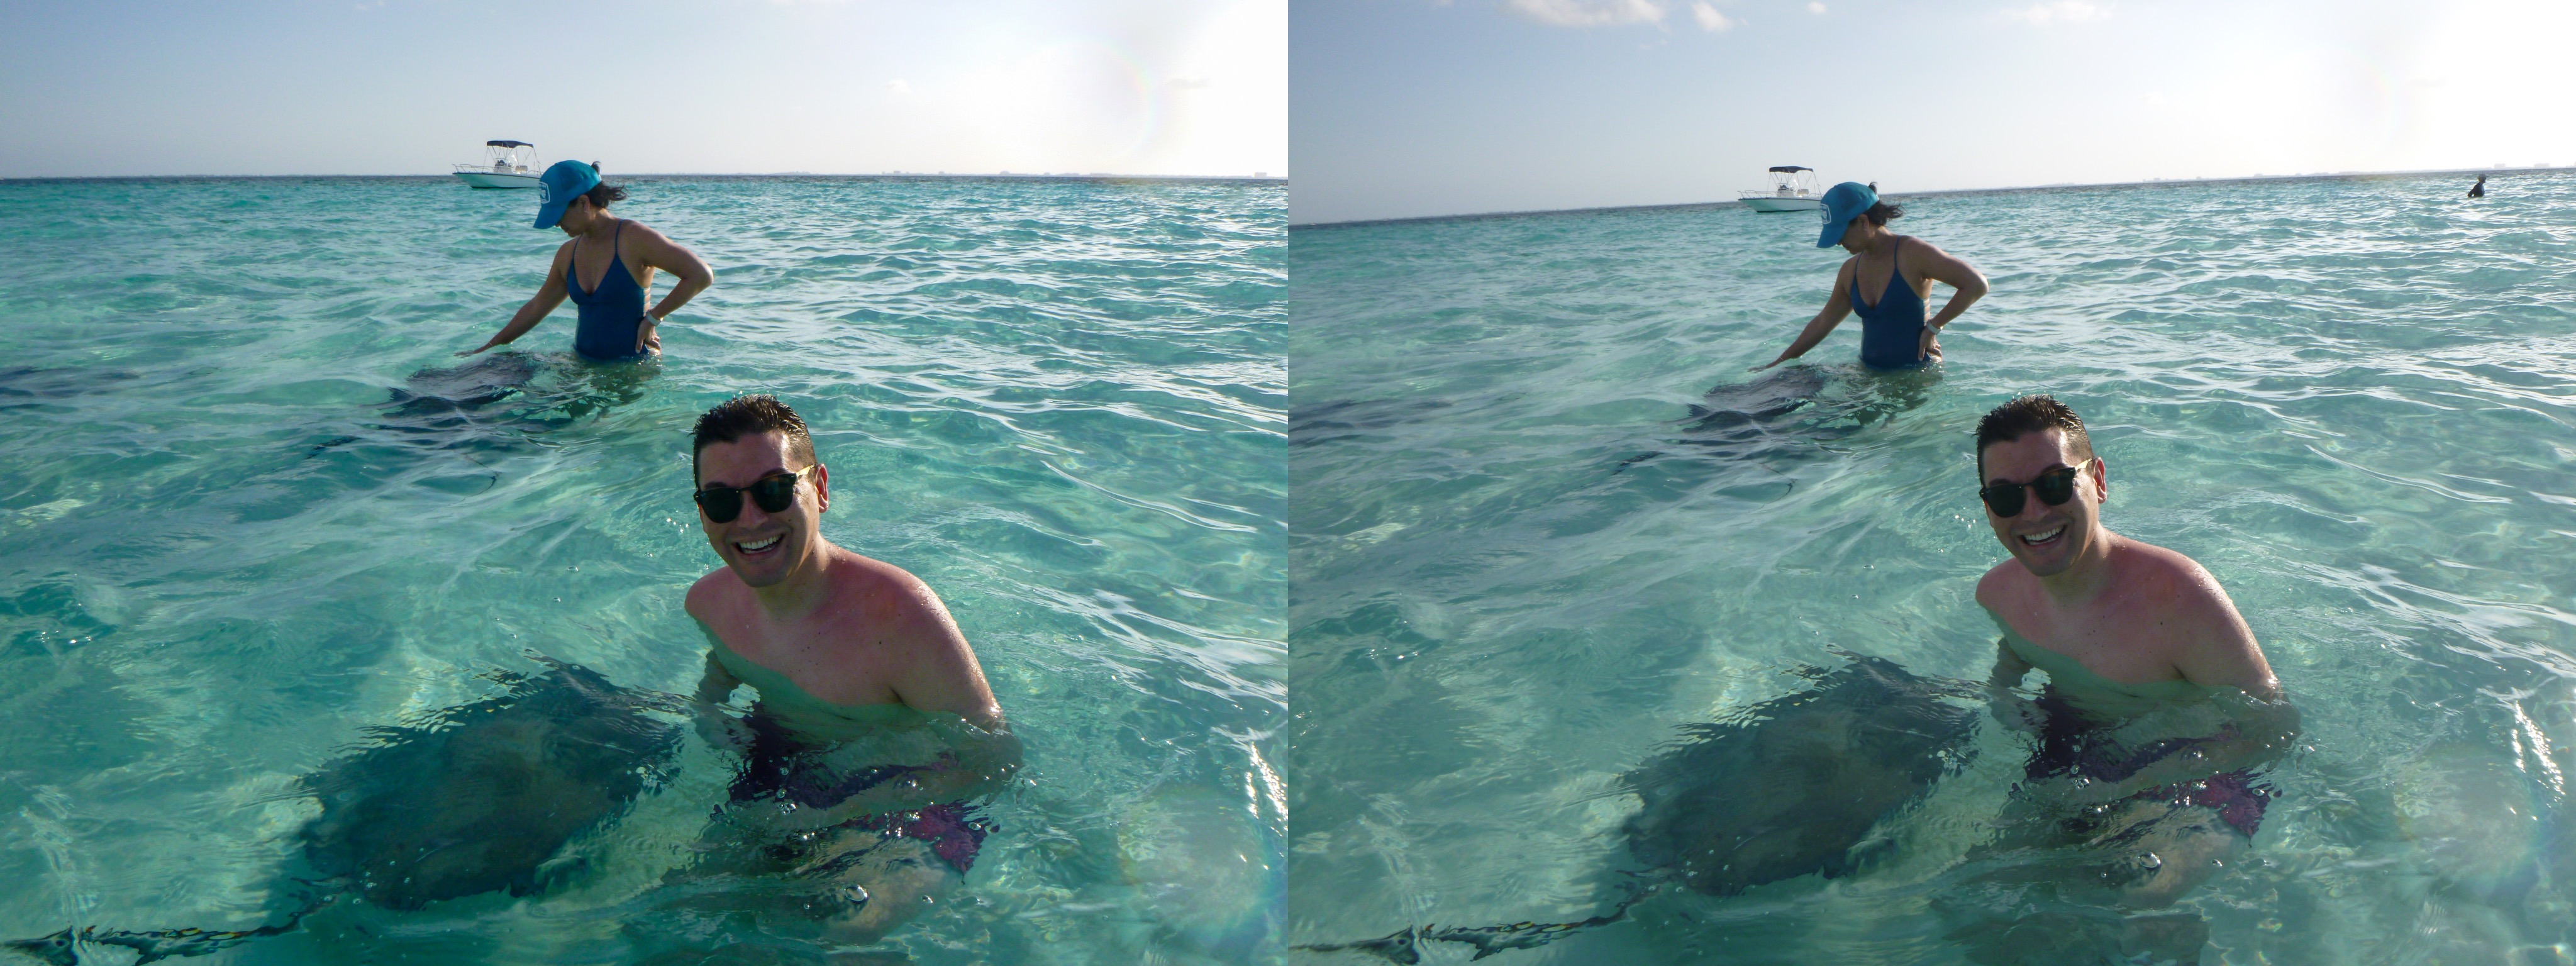 Jason and friend petting stingrays to the screen left side of them in shallow water. Unedited photo next to it with the busted horizon line and some rando I painted out in the edited one.